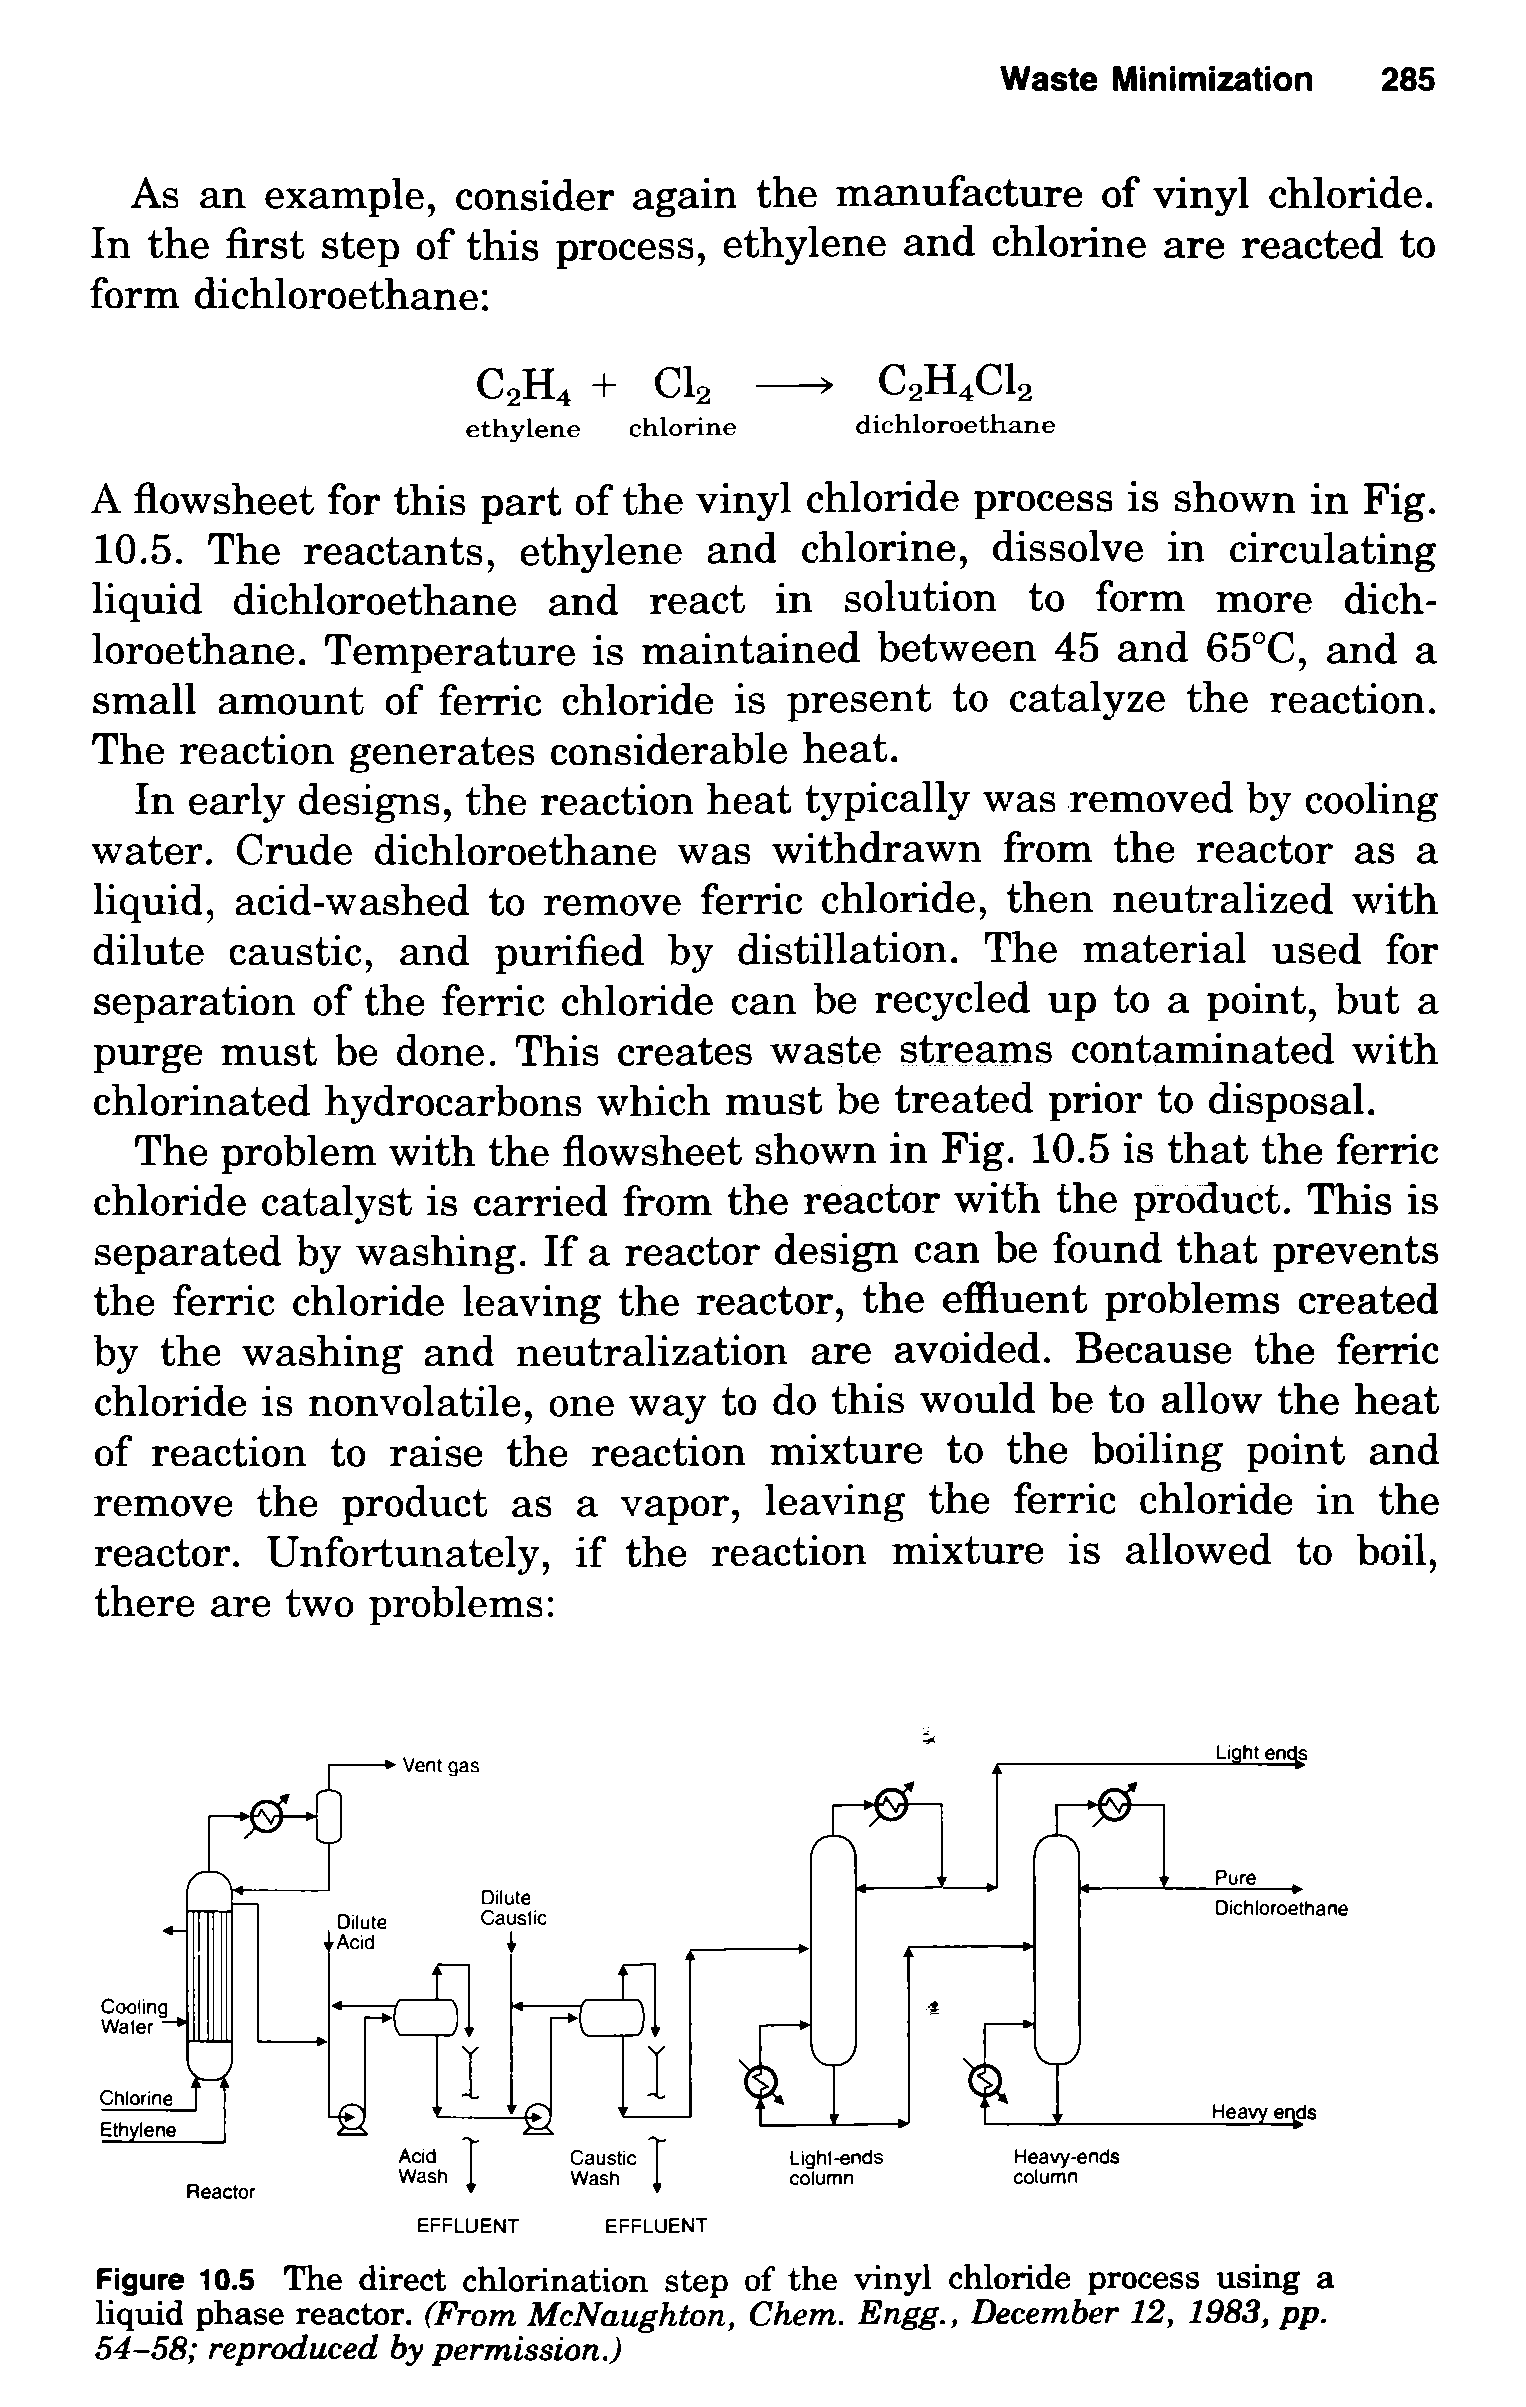 Figure 10.5 The direct chlorination step of the vinyl chloride process using a liquid phase reactor. (From McNaughton, Chem. Engg., December 12, 1983, pp. 54-58 reproduced by permission.)...